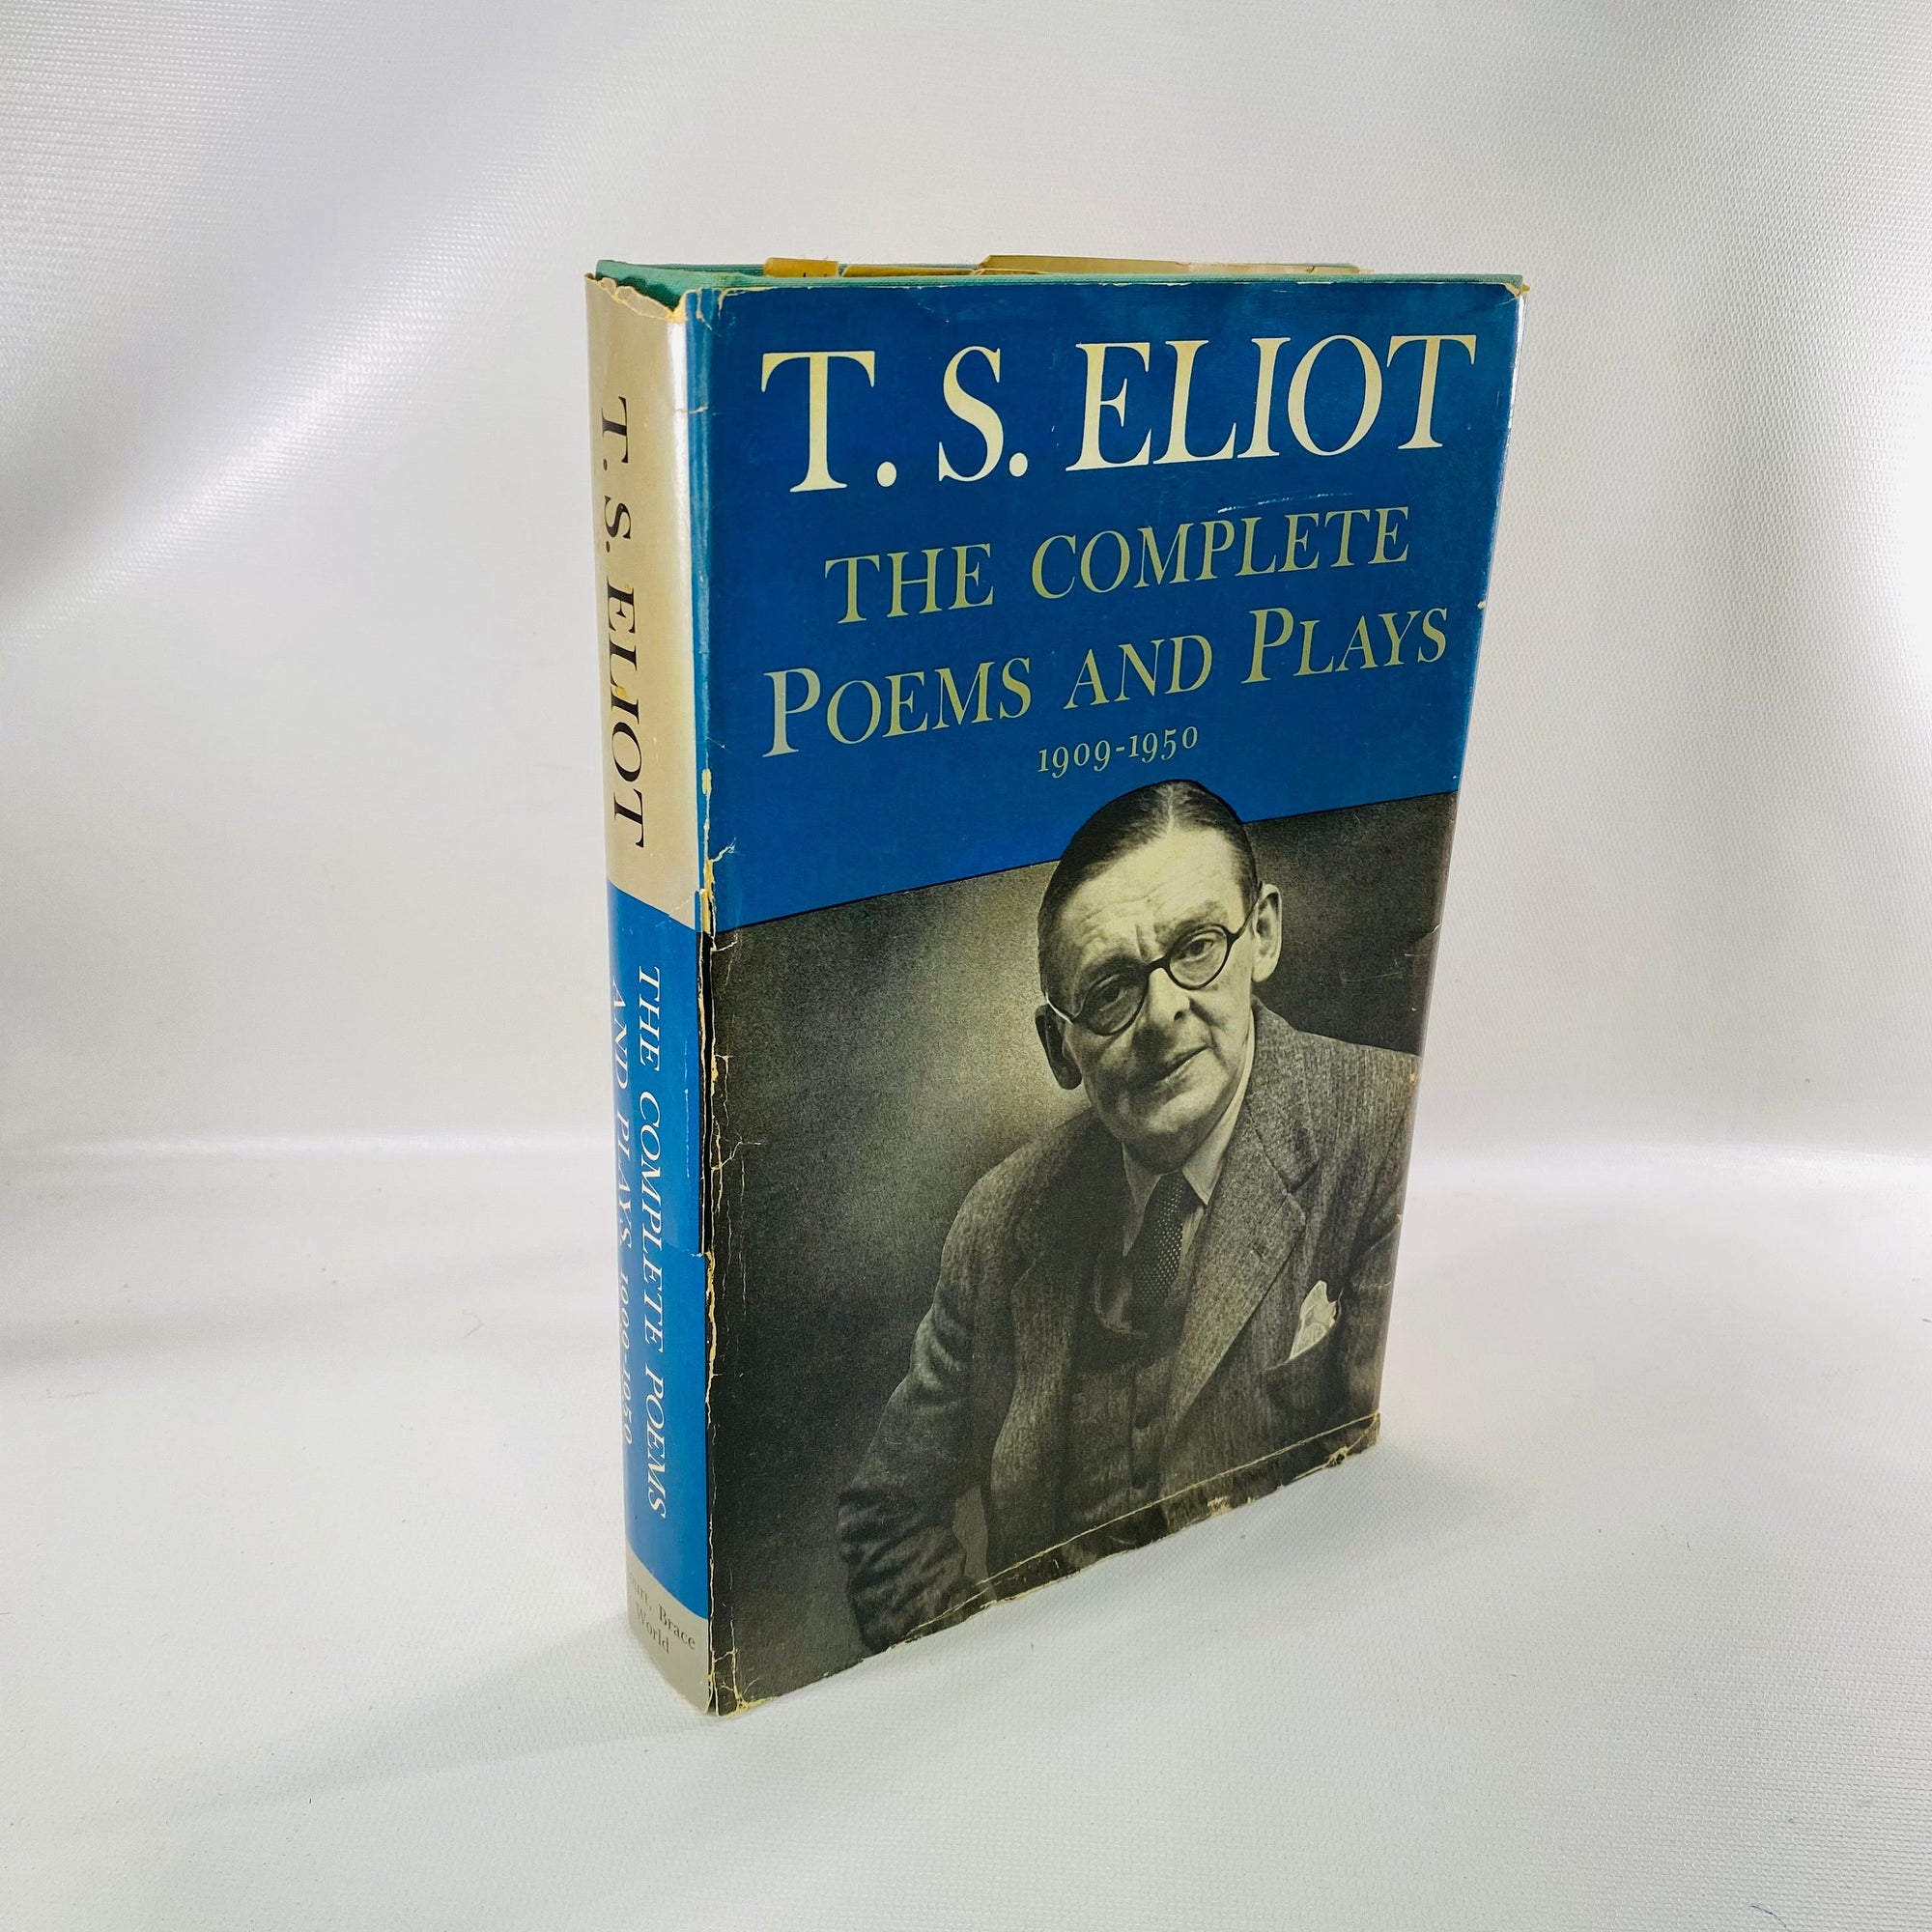 The Complete Poems and Plays 1909-1950 by T. S. Elliot 1952 Harcourt Brace & World Inc. Vintage Book